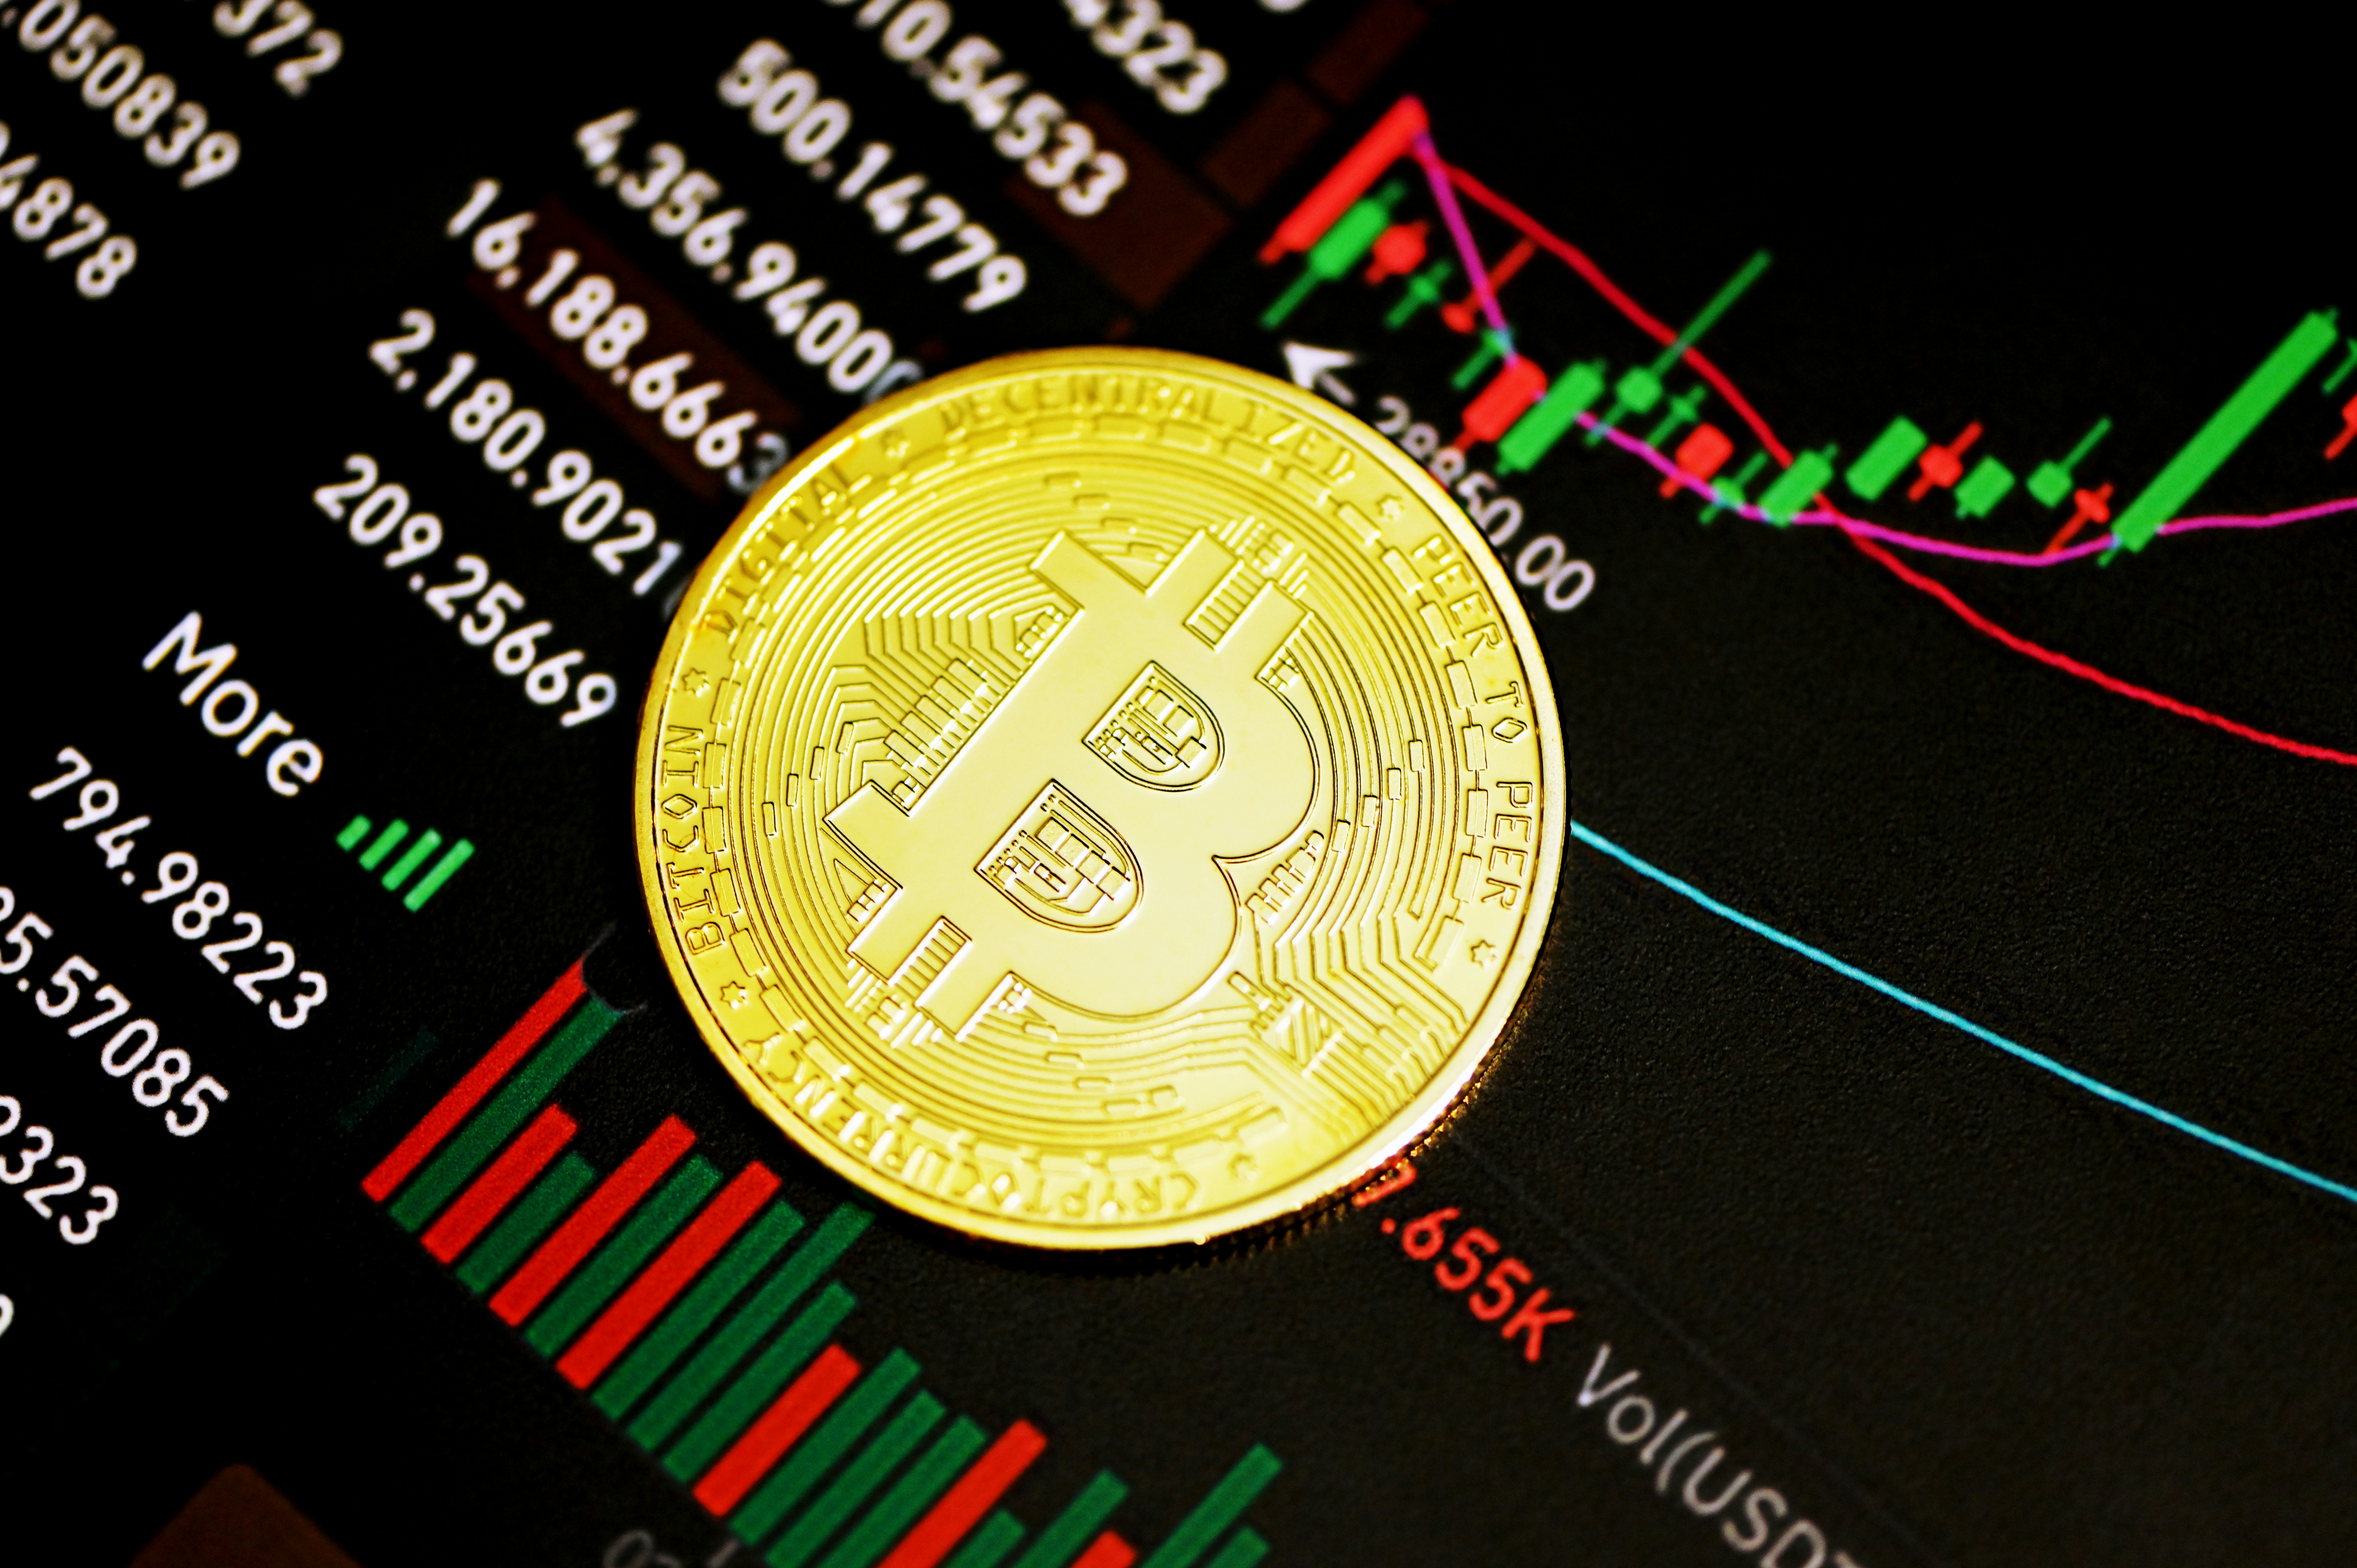 This Bitcoin Indicator May Have Signaled Latest Market Downturn In Advance